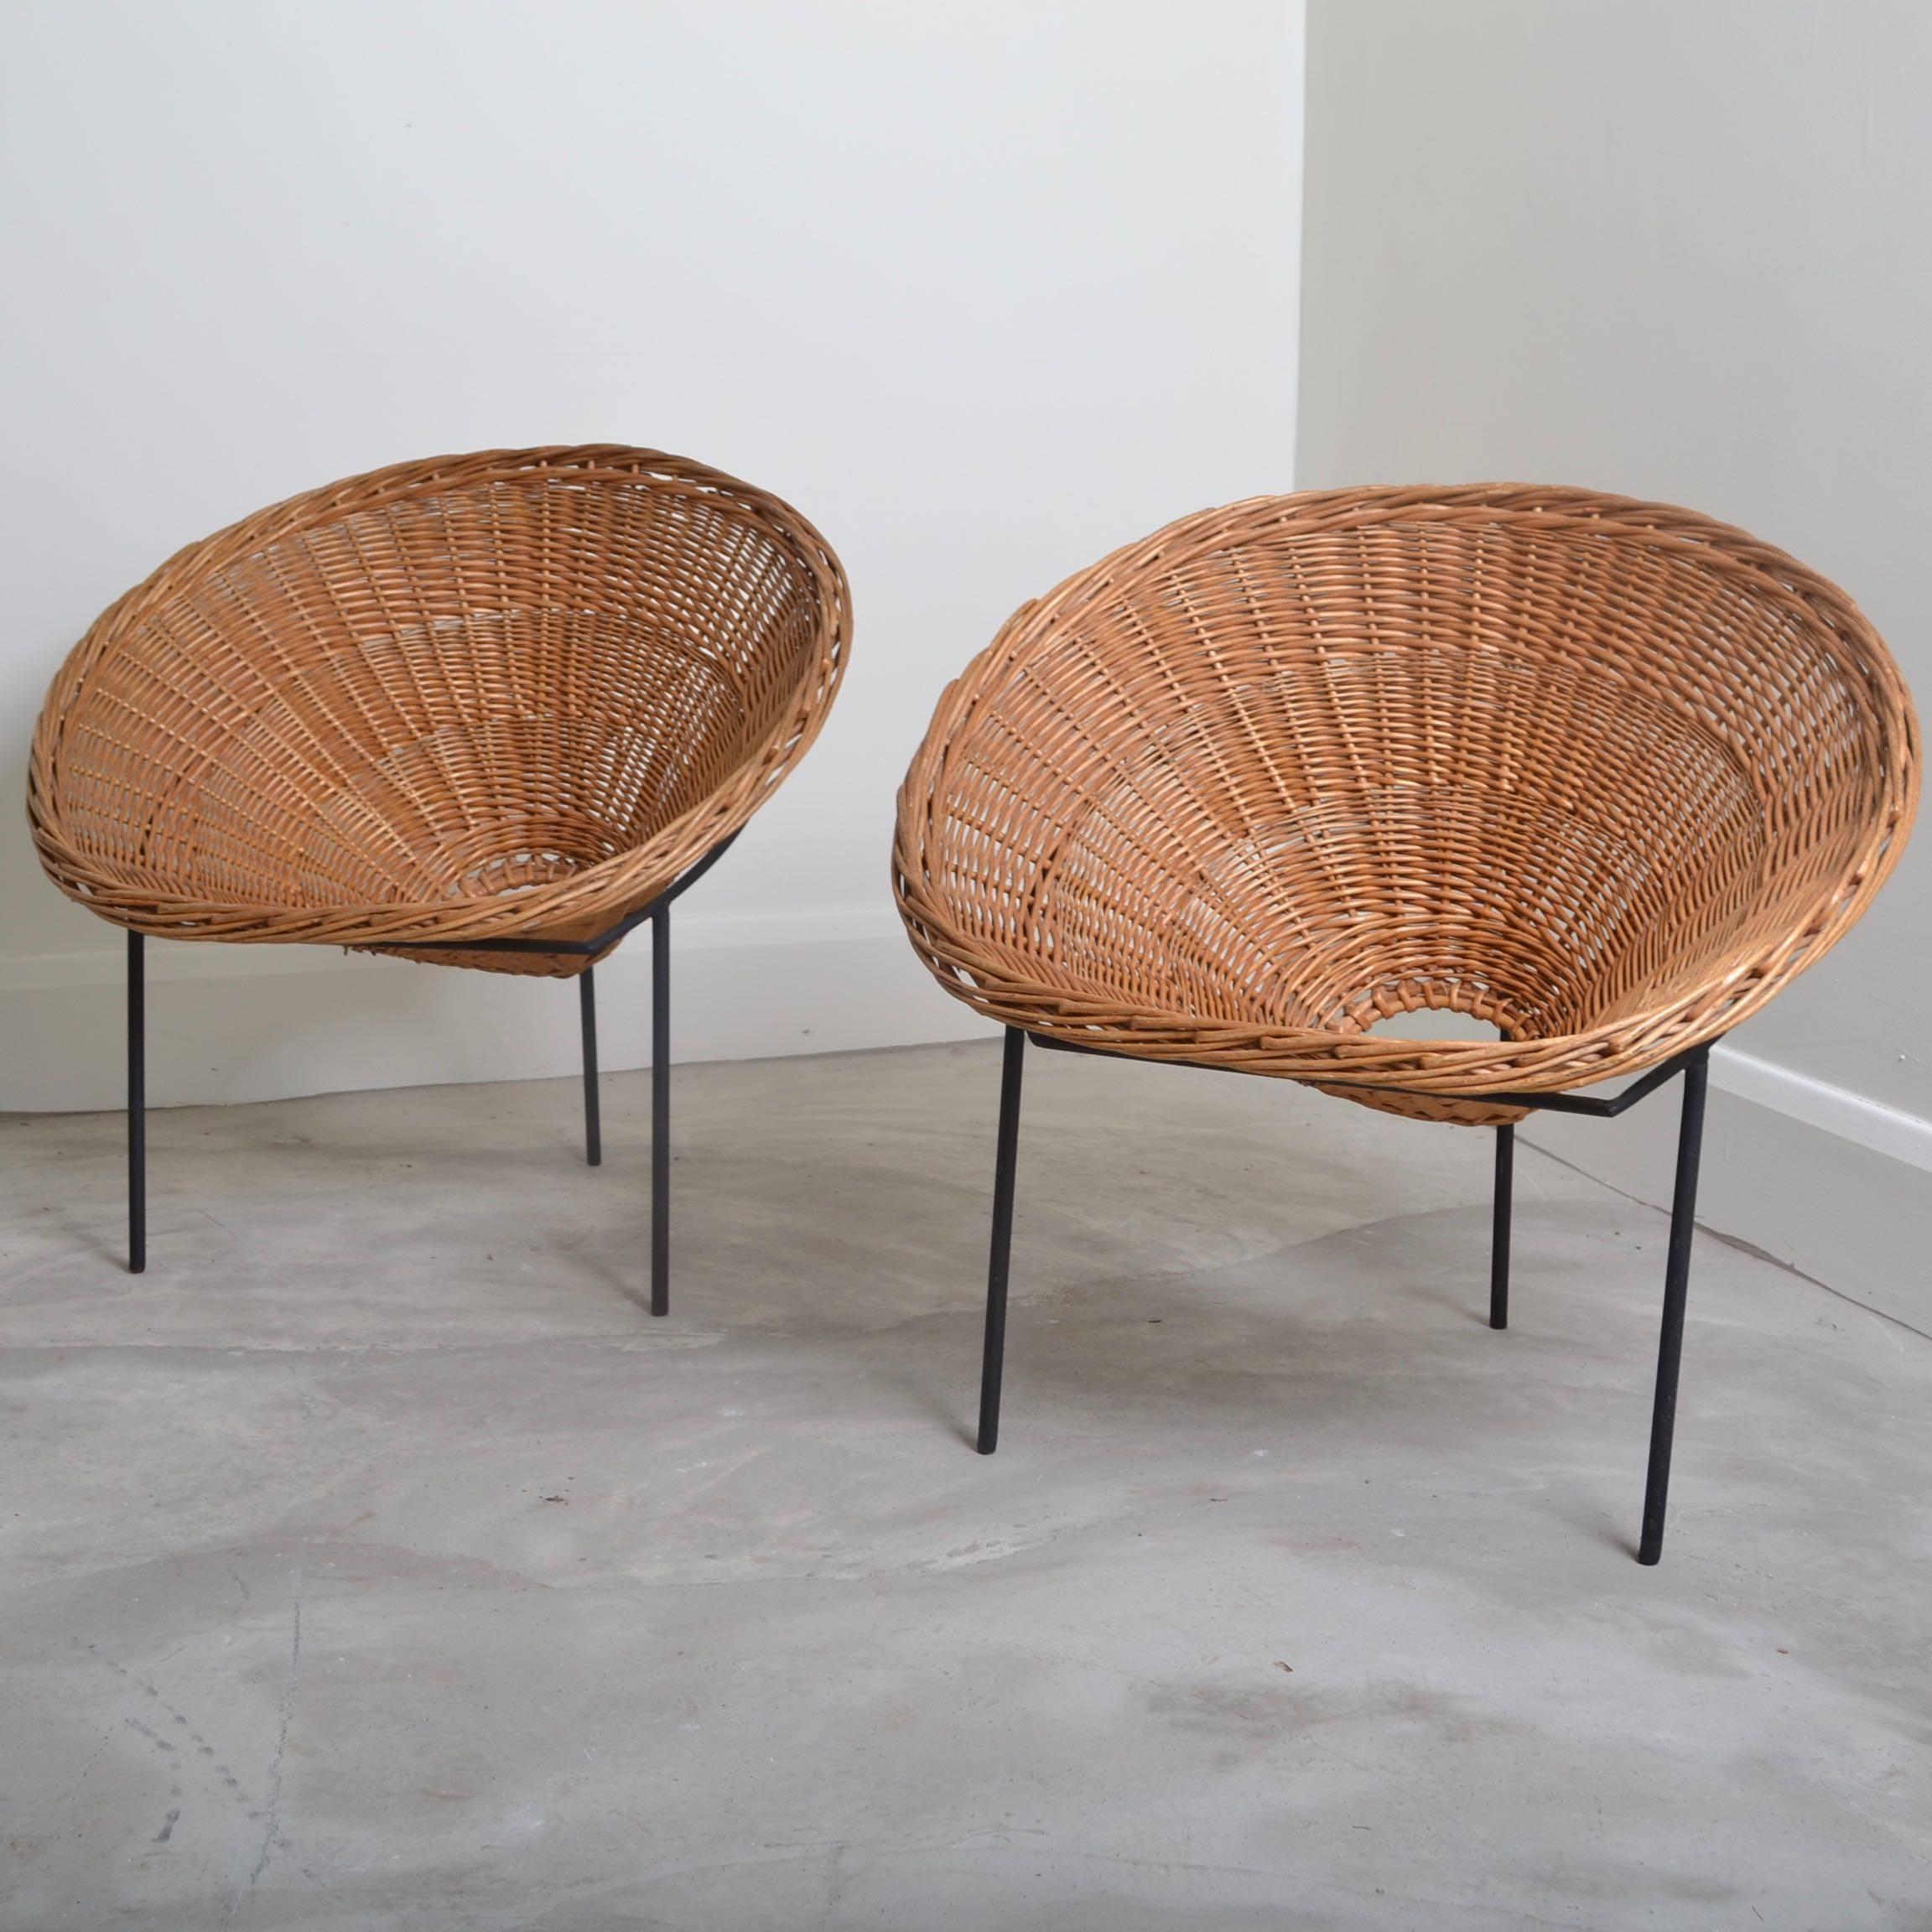 Decorative and stylish wicker chairs in a radial design sitting on a 
black painted iron base .
The wicker is in great condition and fully intact.
Manufactured in France 1950